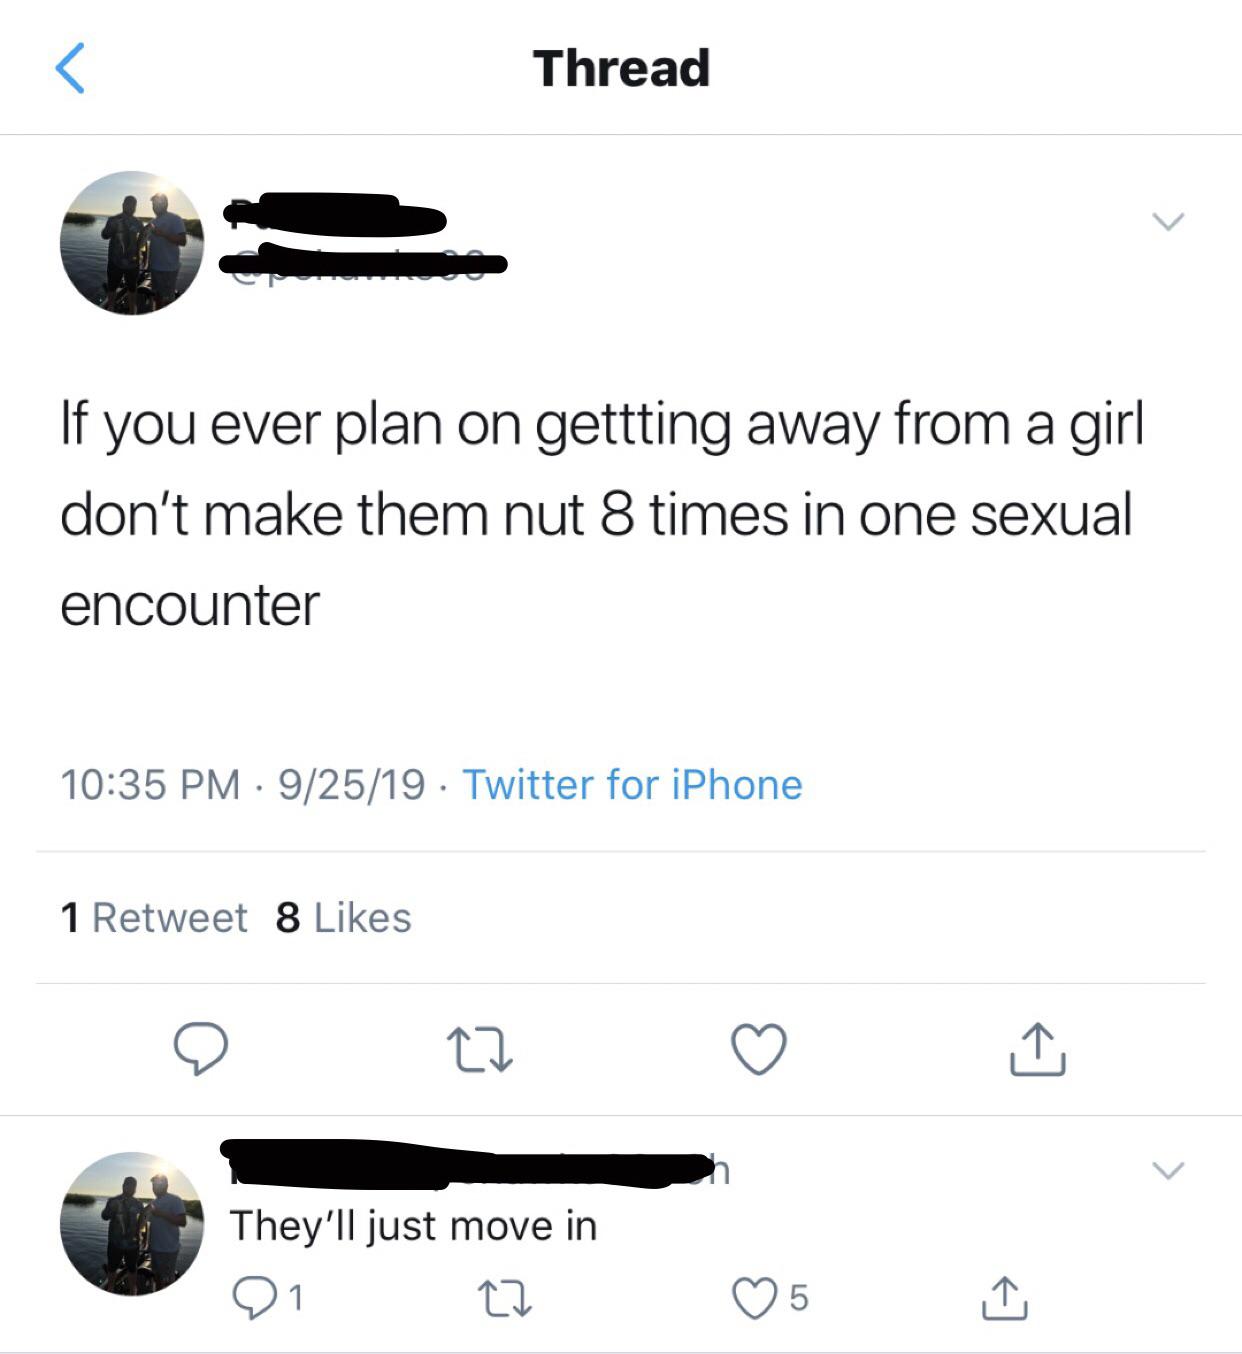 sex memes - Thread If you ever plan on gettting away from a girl don't make them nut 8 times in one sexual encounter 92519 Twitter for iPhone 1 Retweet 8 They'll just move in O1 22 They'll just move in 05